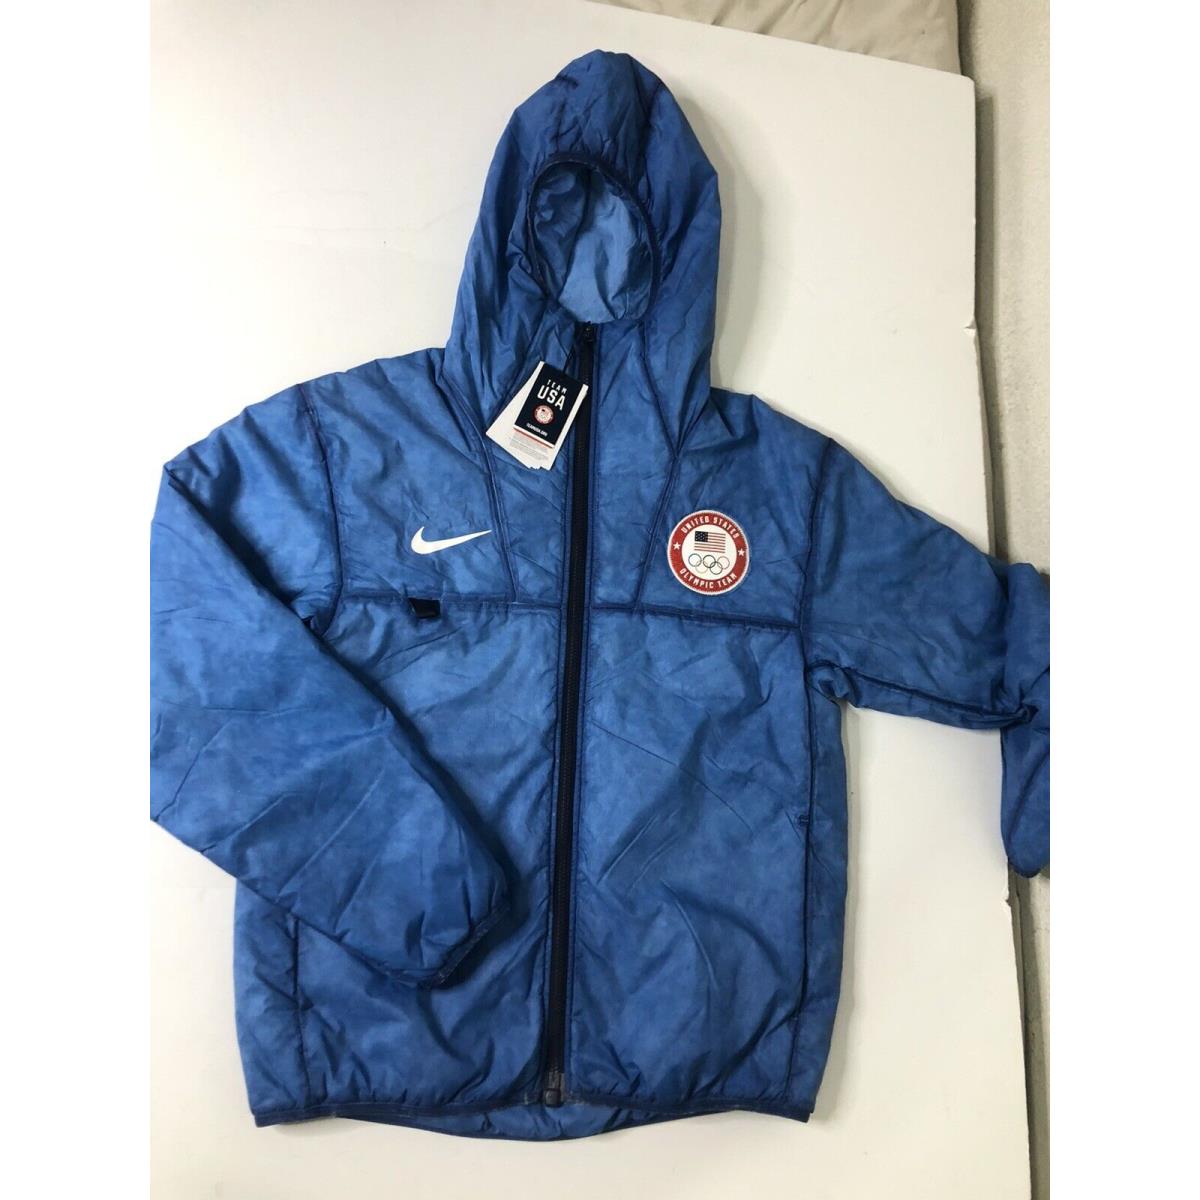 Nike Acg Therma-fit Adv Rope De Dope Usa Olympic Jacket DH1596-476 Men`s Sz S